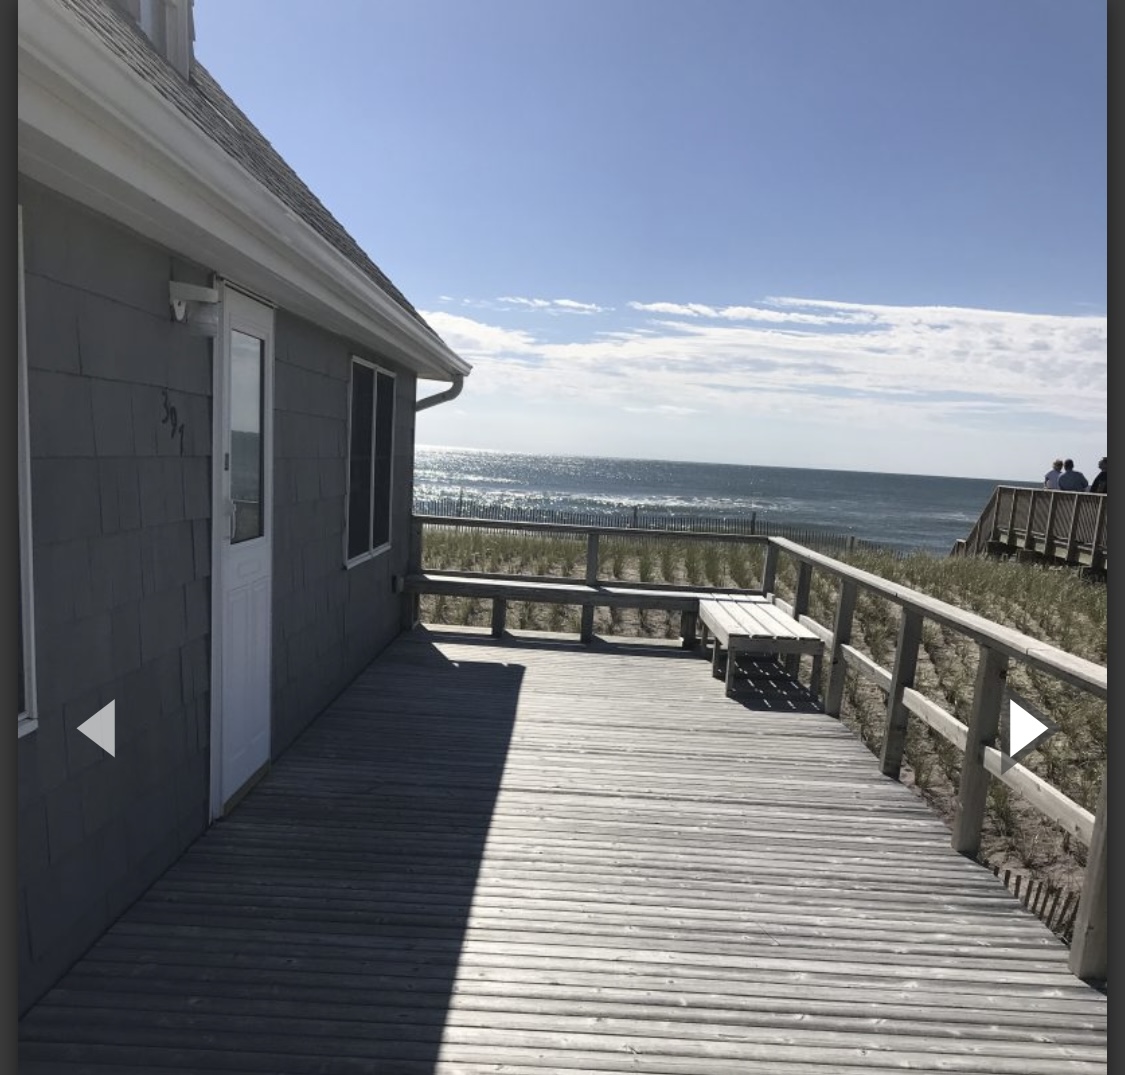 This oceanfront home is ideally located in Ocean Beach on the border of Corneille Estates.  Situated on a large 50'X100' parcel, this property represents a rare opportunity to renovate the existing oceanfront home with room for a pool, subject to DEC approval!